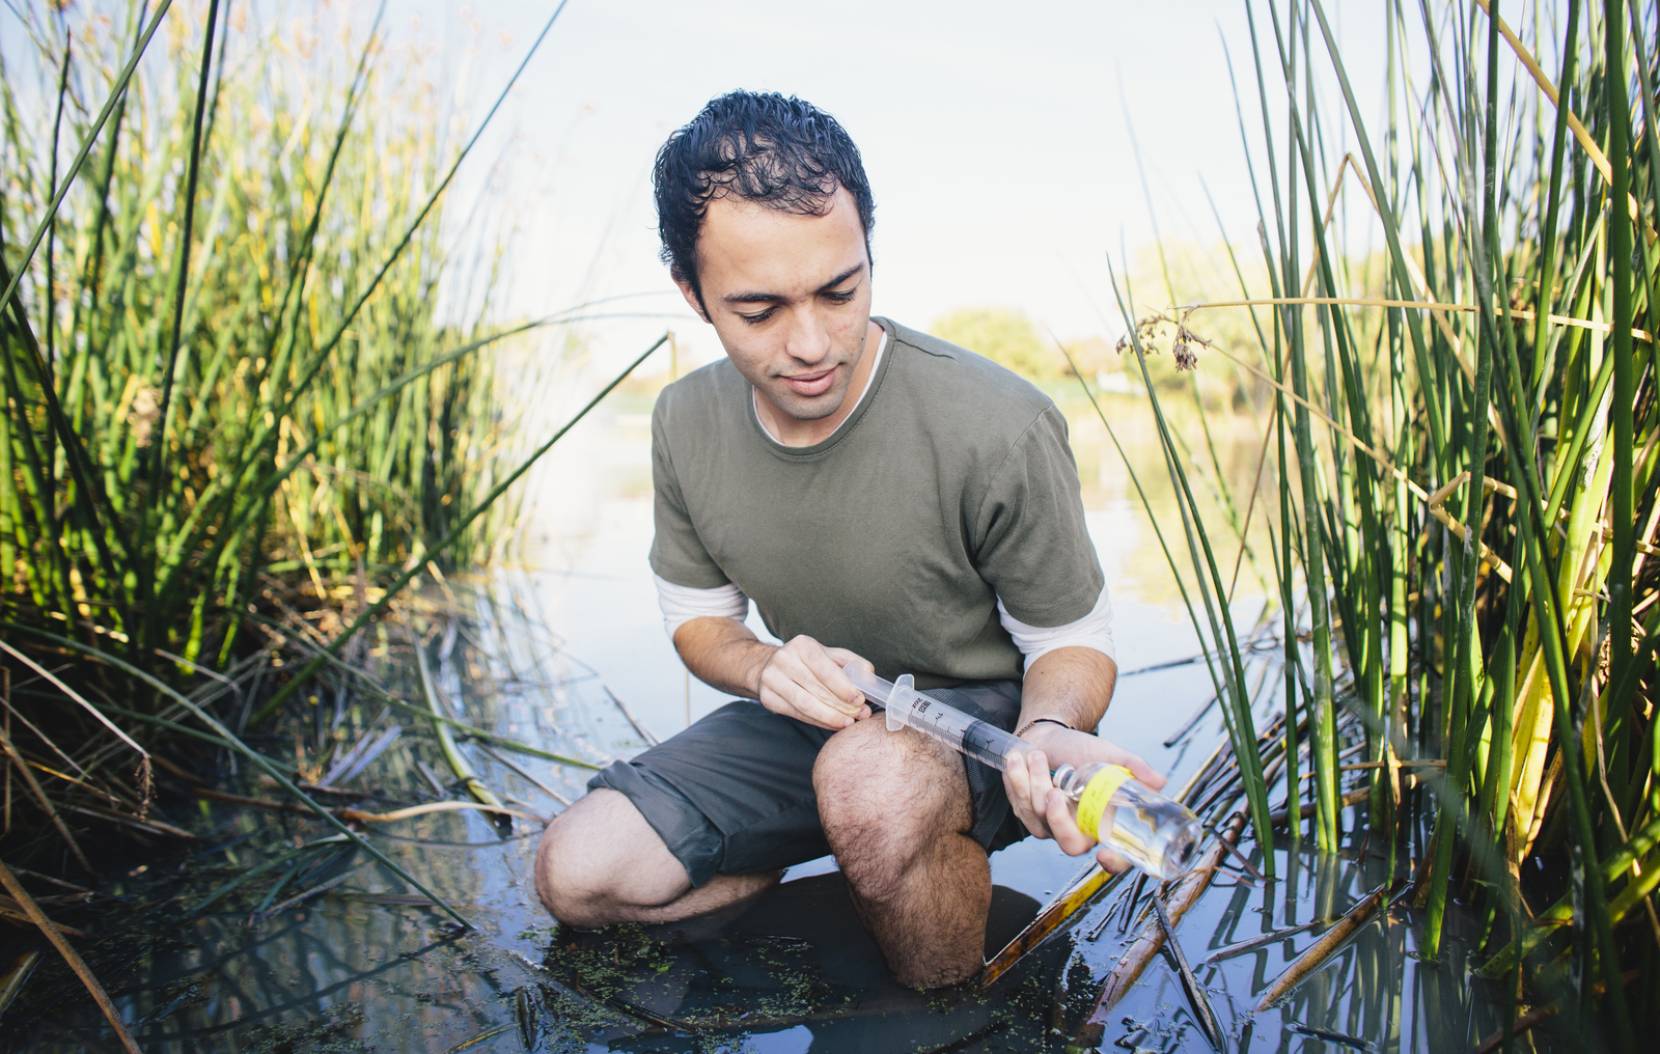 Student researcher testing water while squatting in water surrounded by tall grass.